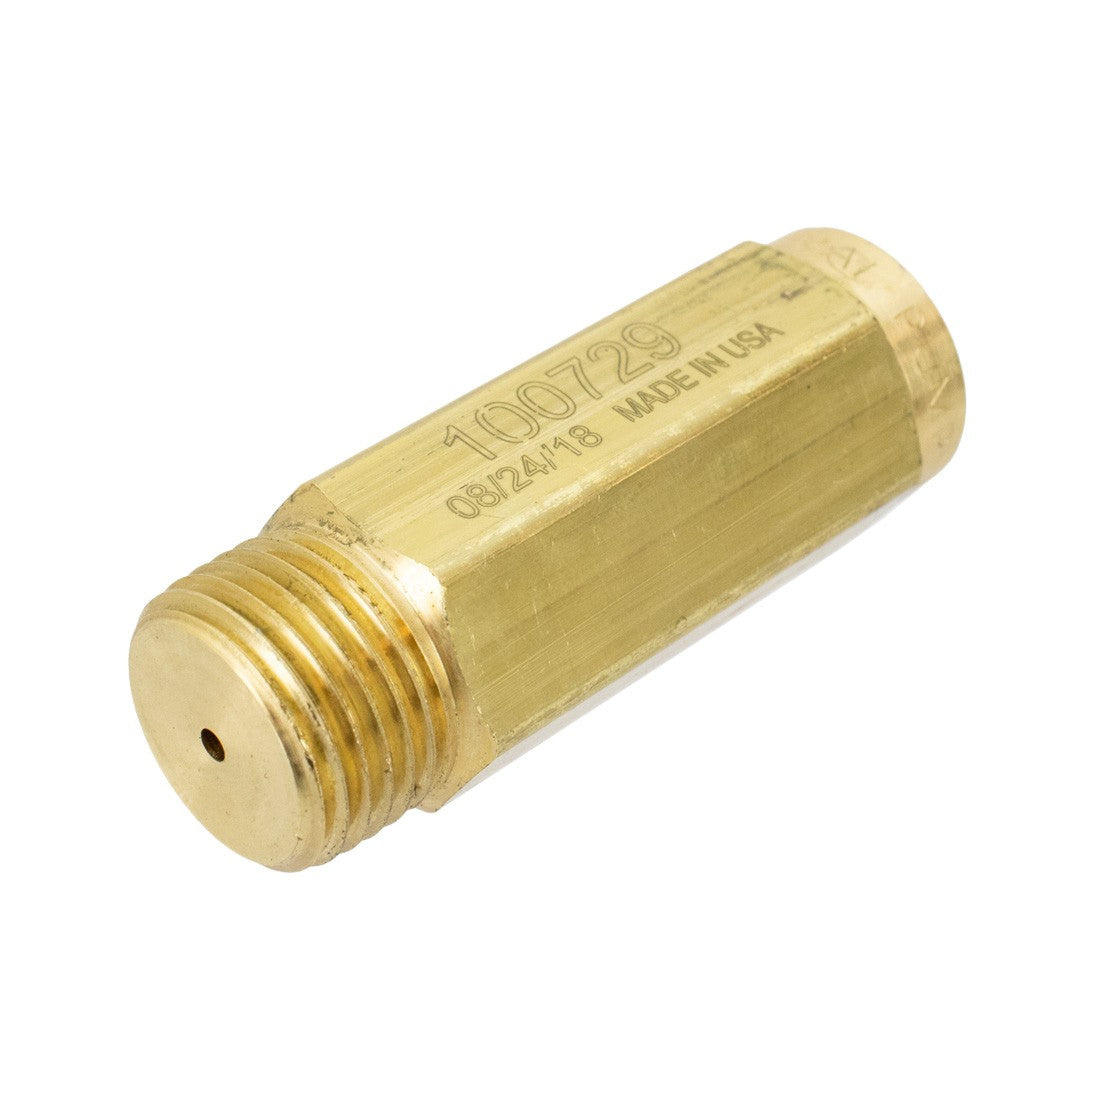 IPC Eagle Safety Relief Valve - 2 Port 300 PSI MA